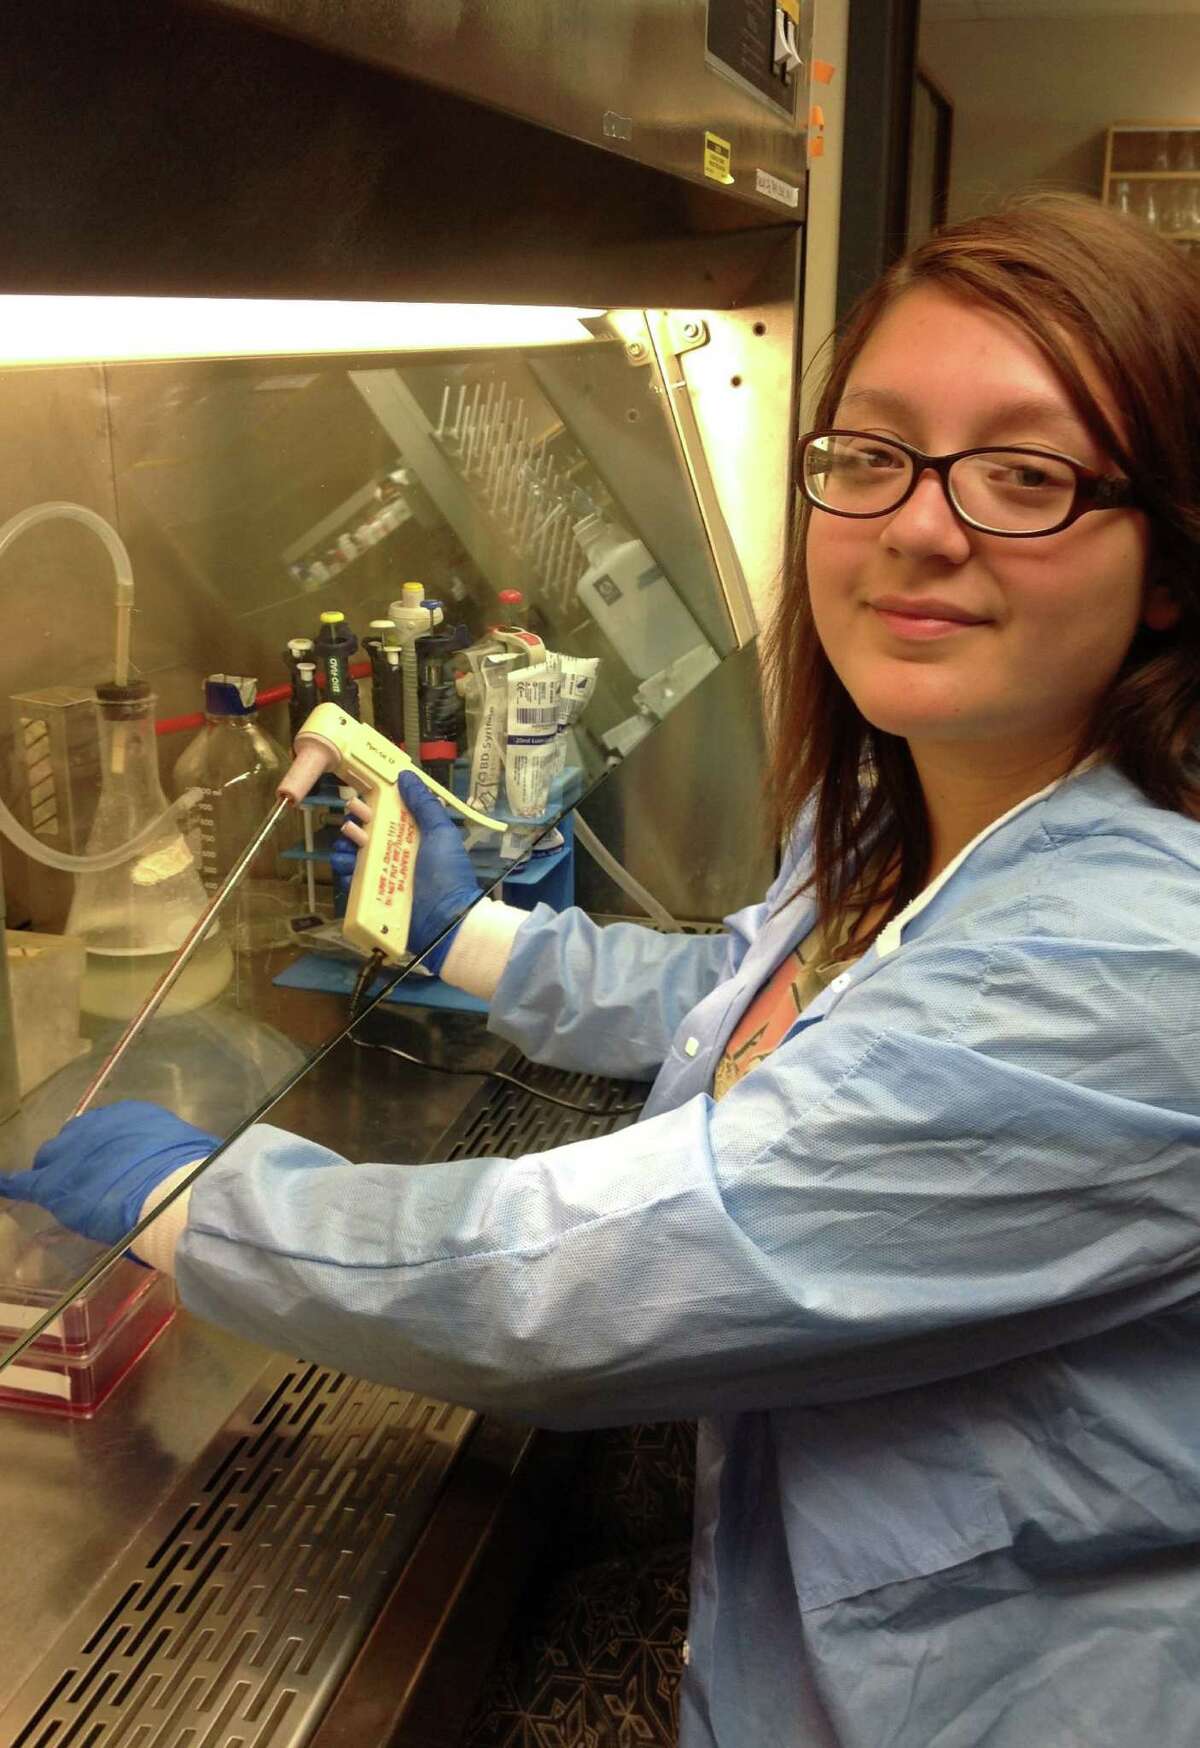 Diana Godoy, a student at Palo Alto College, works in the biochemistry laboratory of Andrew Tsin at UTSA.